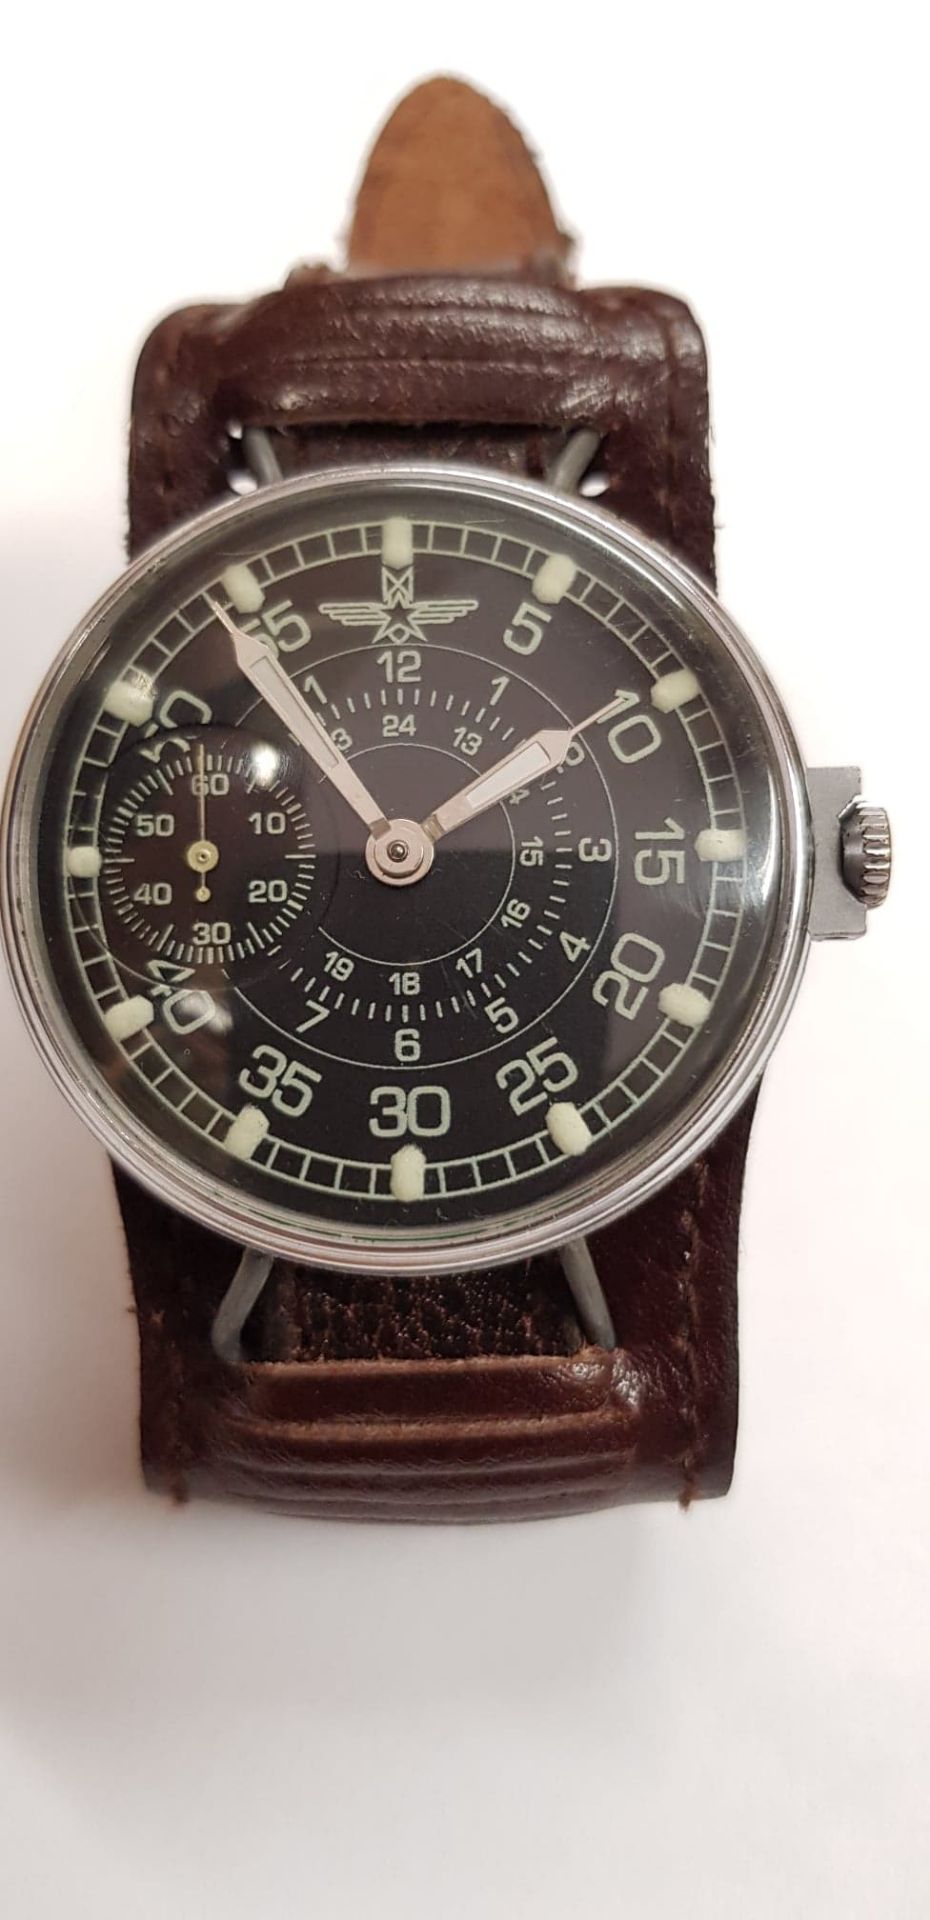 Russian Military Style Wristwatch On Bund Leather Strap - Image 10 of 10